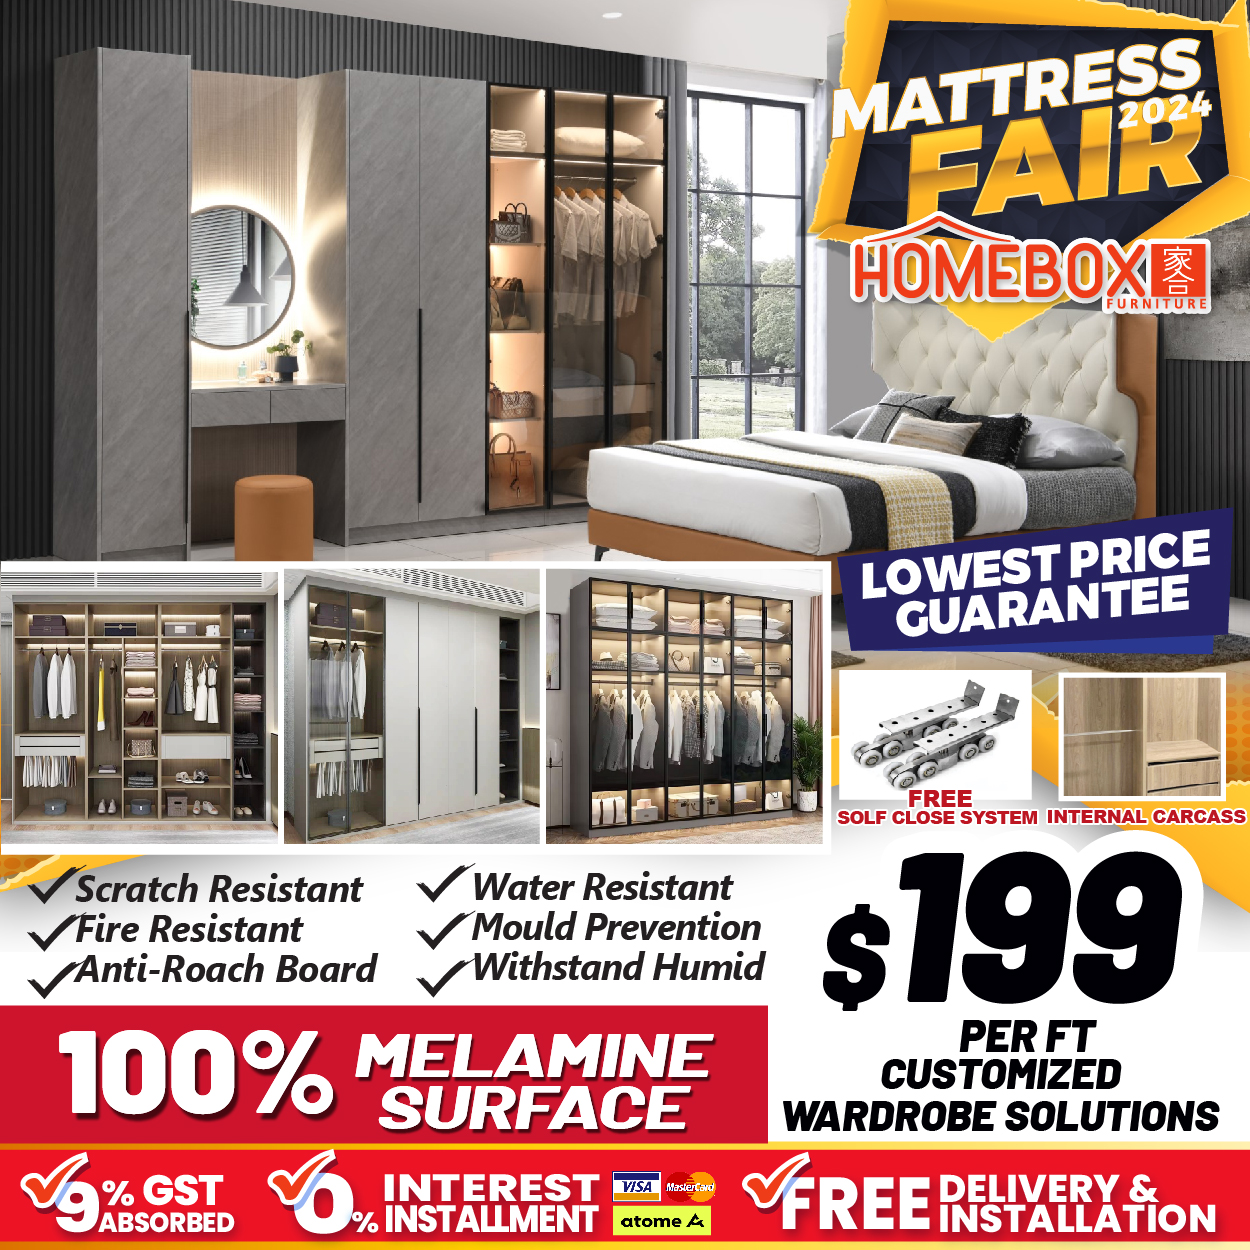 Lobang: Homebox's Biggest Mattress Fair in Aljunied Has Everything At Up To 80% Off From Now Till 5 May 24. Get A Free Mattres Upgrade During The Sale! - 25